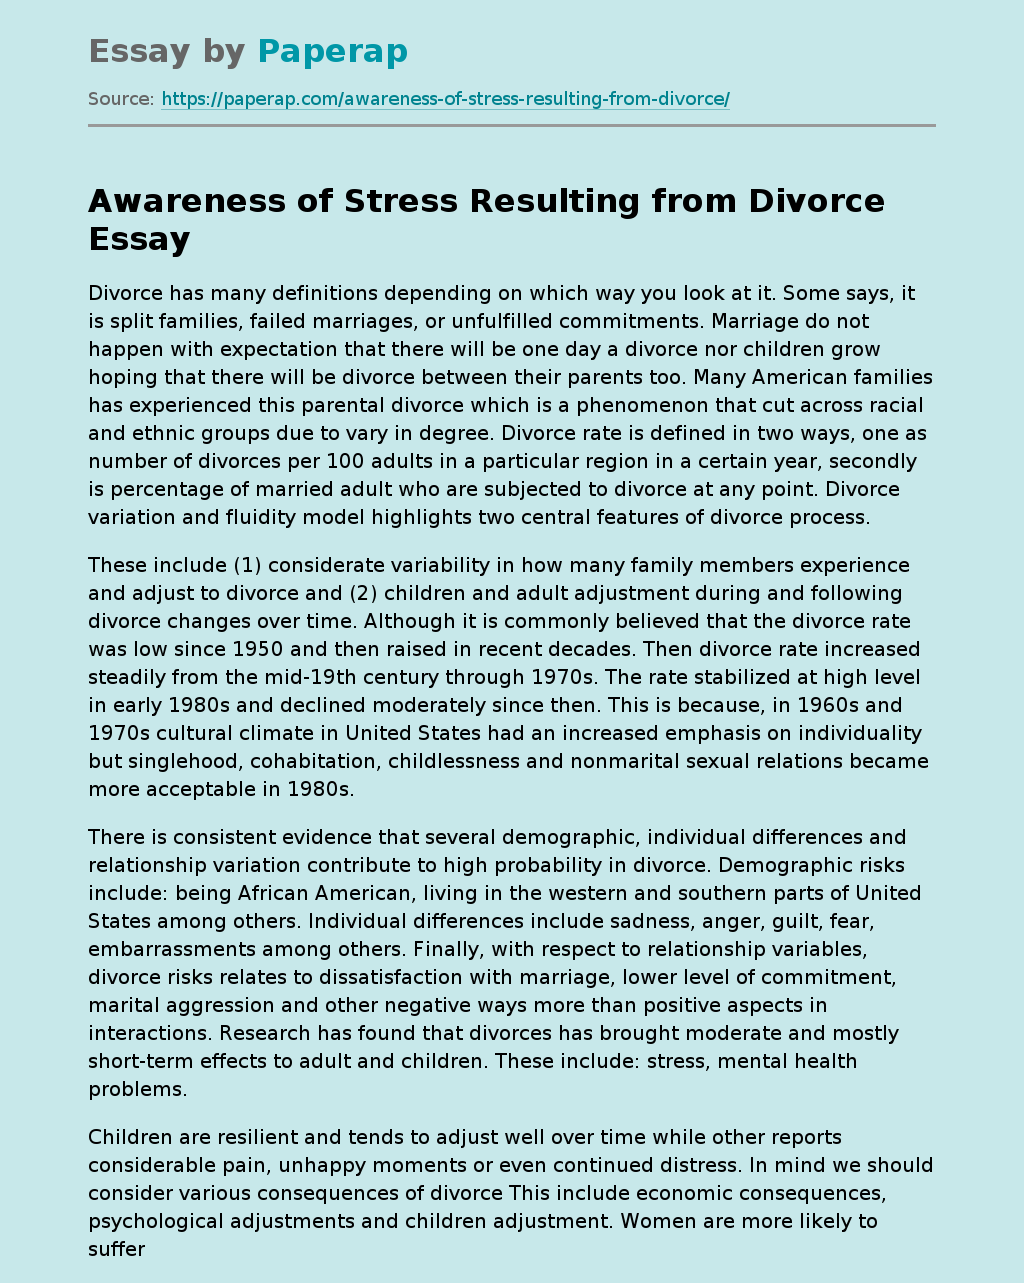 Awareness of Stress Resulting from Divorce